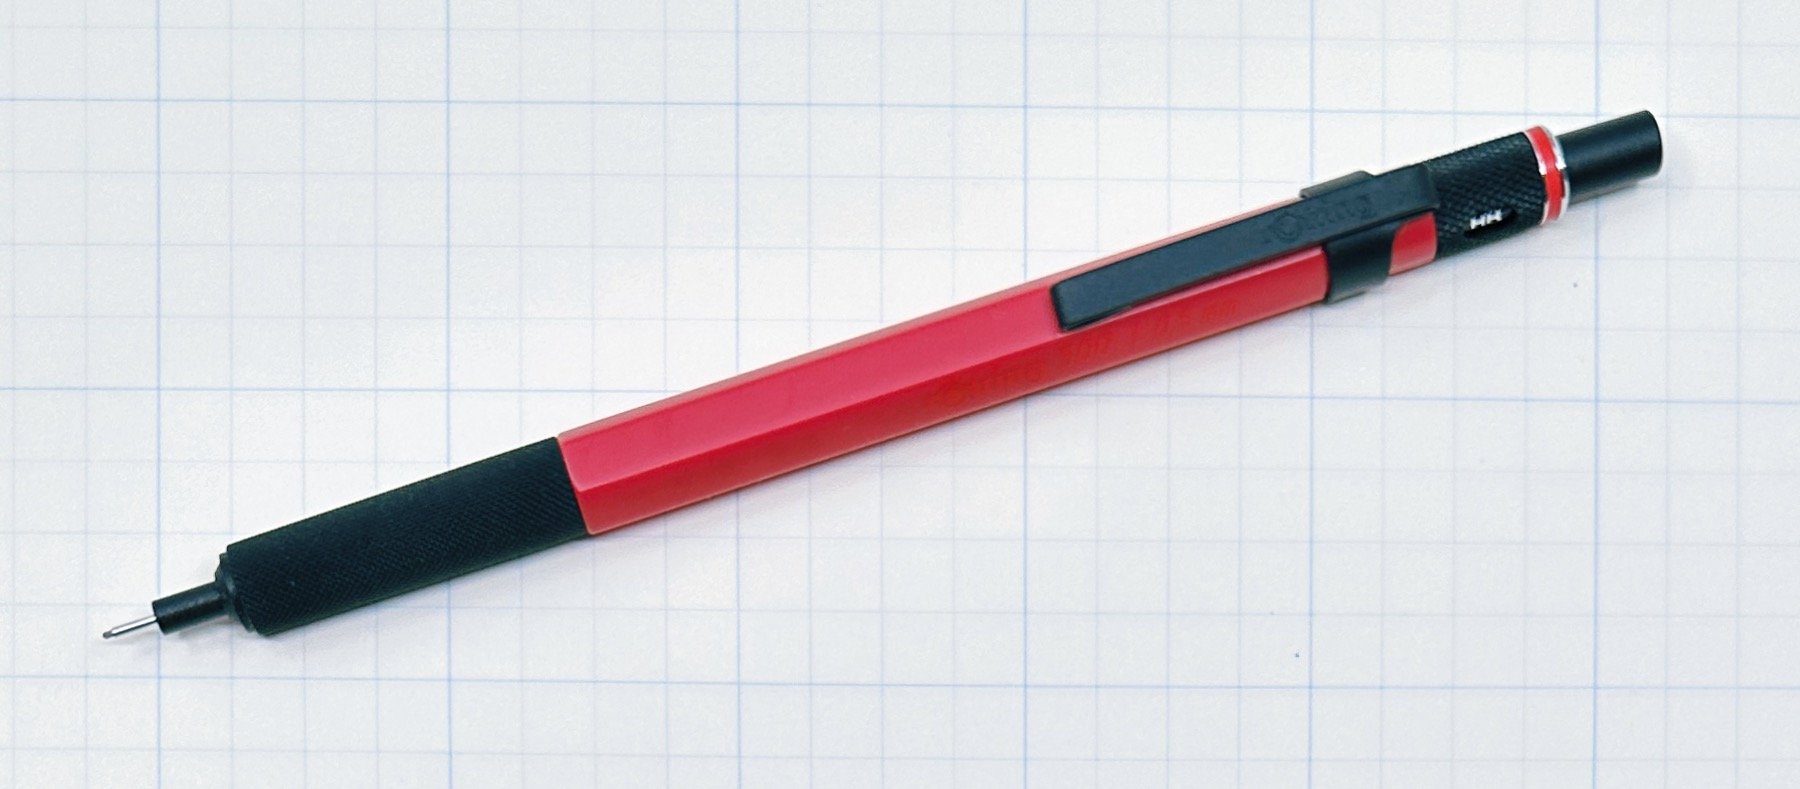 Rotring 500 0.5 mm Drafting Pencil Review — The Pen Addict